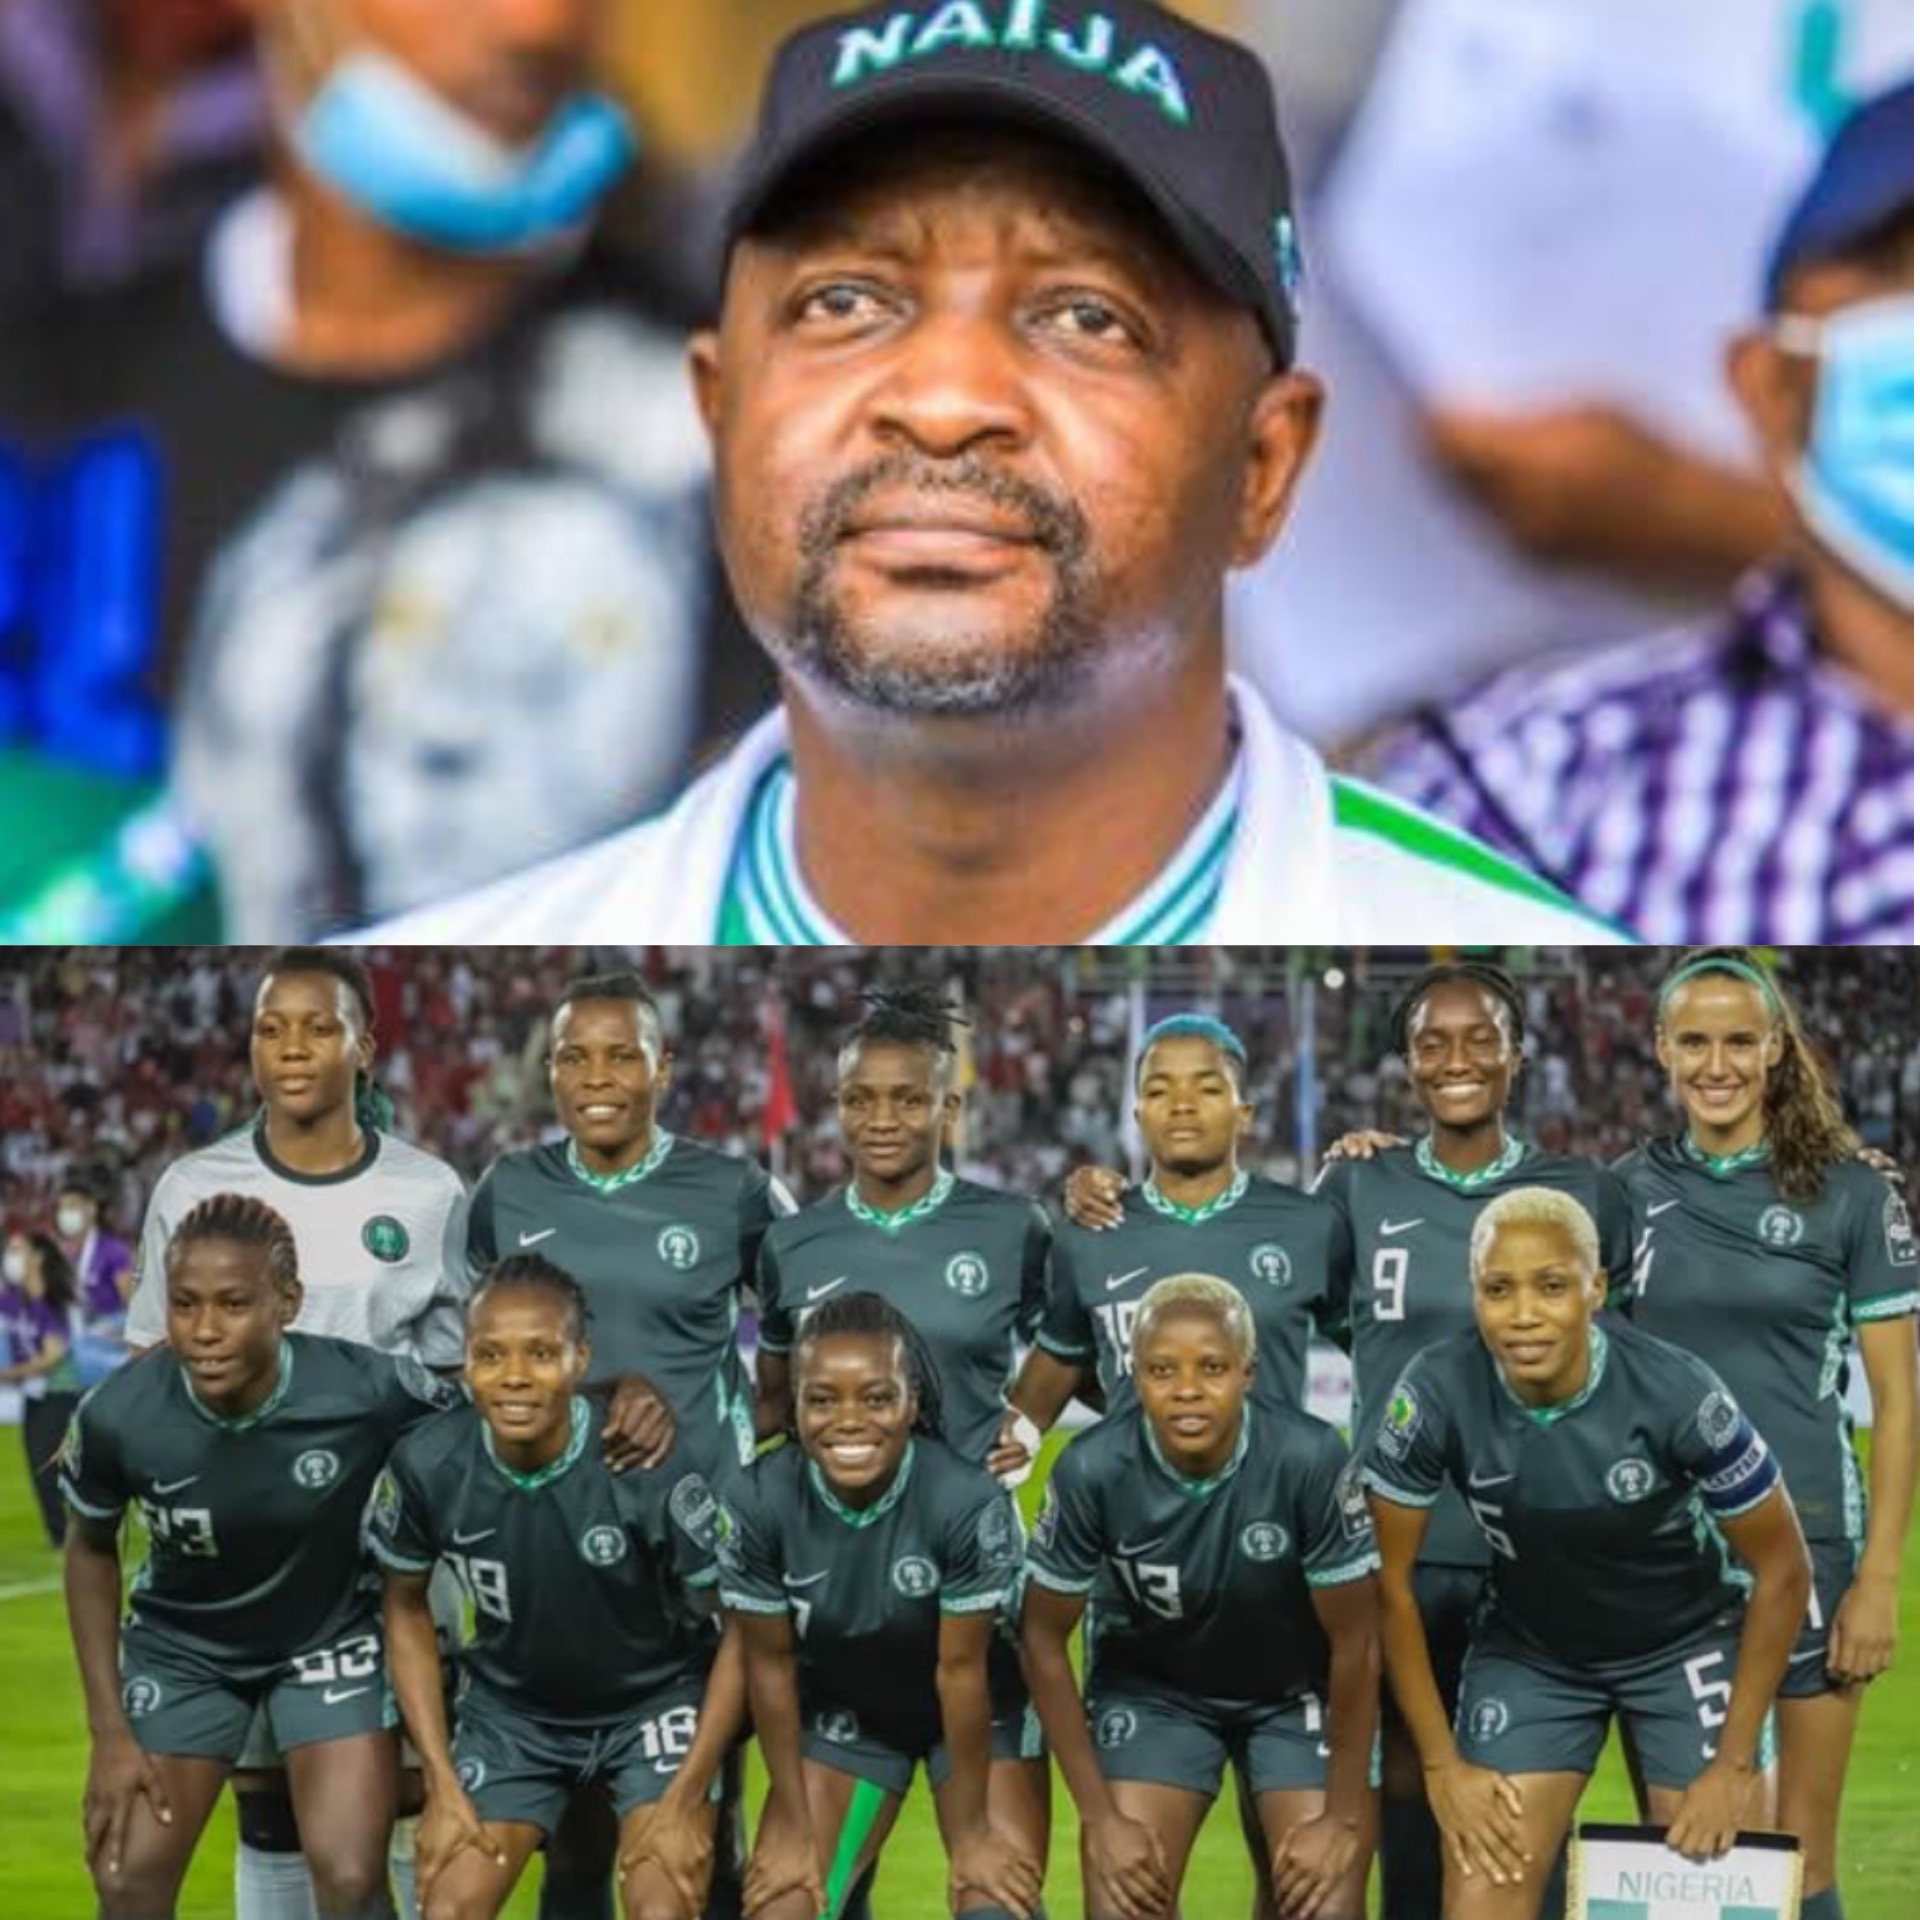 ‘You are our champions and true heroines’ – Sports Minister Sunday Dare salutes Super Falcons after penalty loss to Morocco in WAFCON semi-final